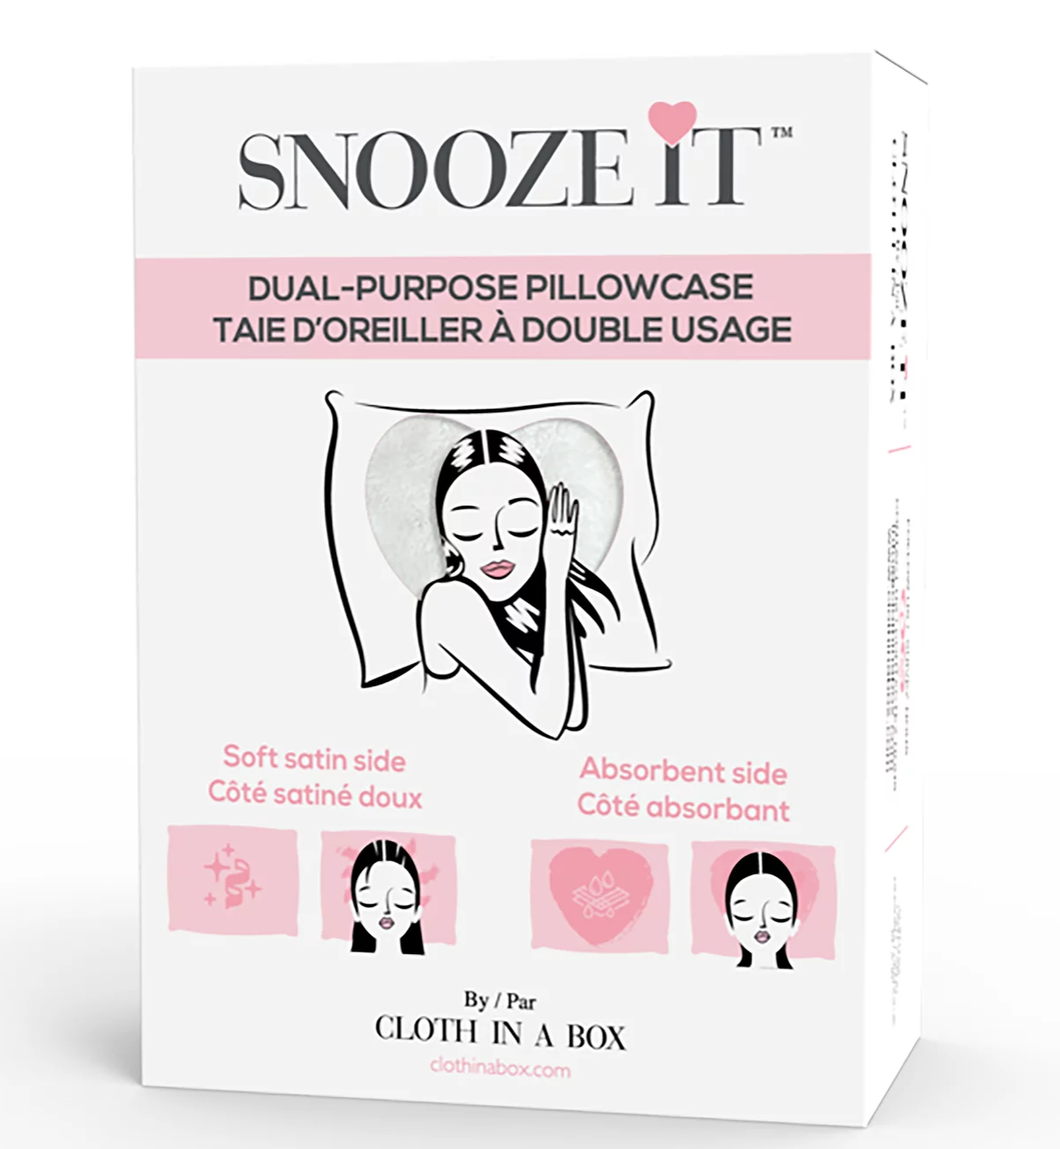 Snooze It Buttercream is a dual-use pillowcase offering both comfort and functionality. This innovative pillowcase offers an absorbent side and a satin side to accompany your nightly beauty sleep ritual!  Absorbent side:  Controls moisture; Absorbs excess water in wet hair without leaving your pillow wet; Perfect for overnight hair treatments. Satin side:  Gentle on the skin Helps keep hair shiny; Controls frizz; Protects eyelash extensions.